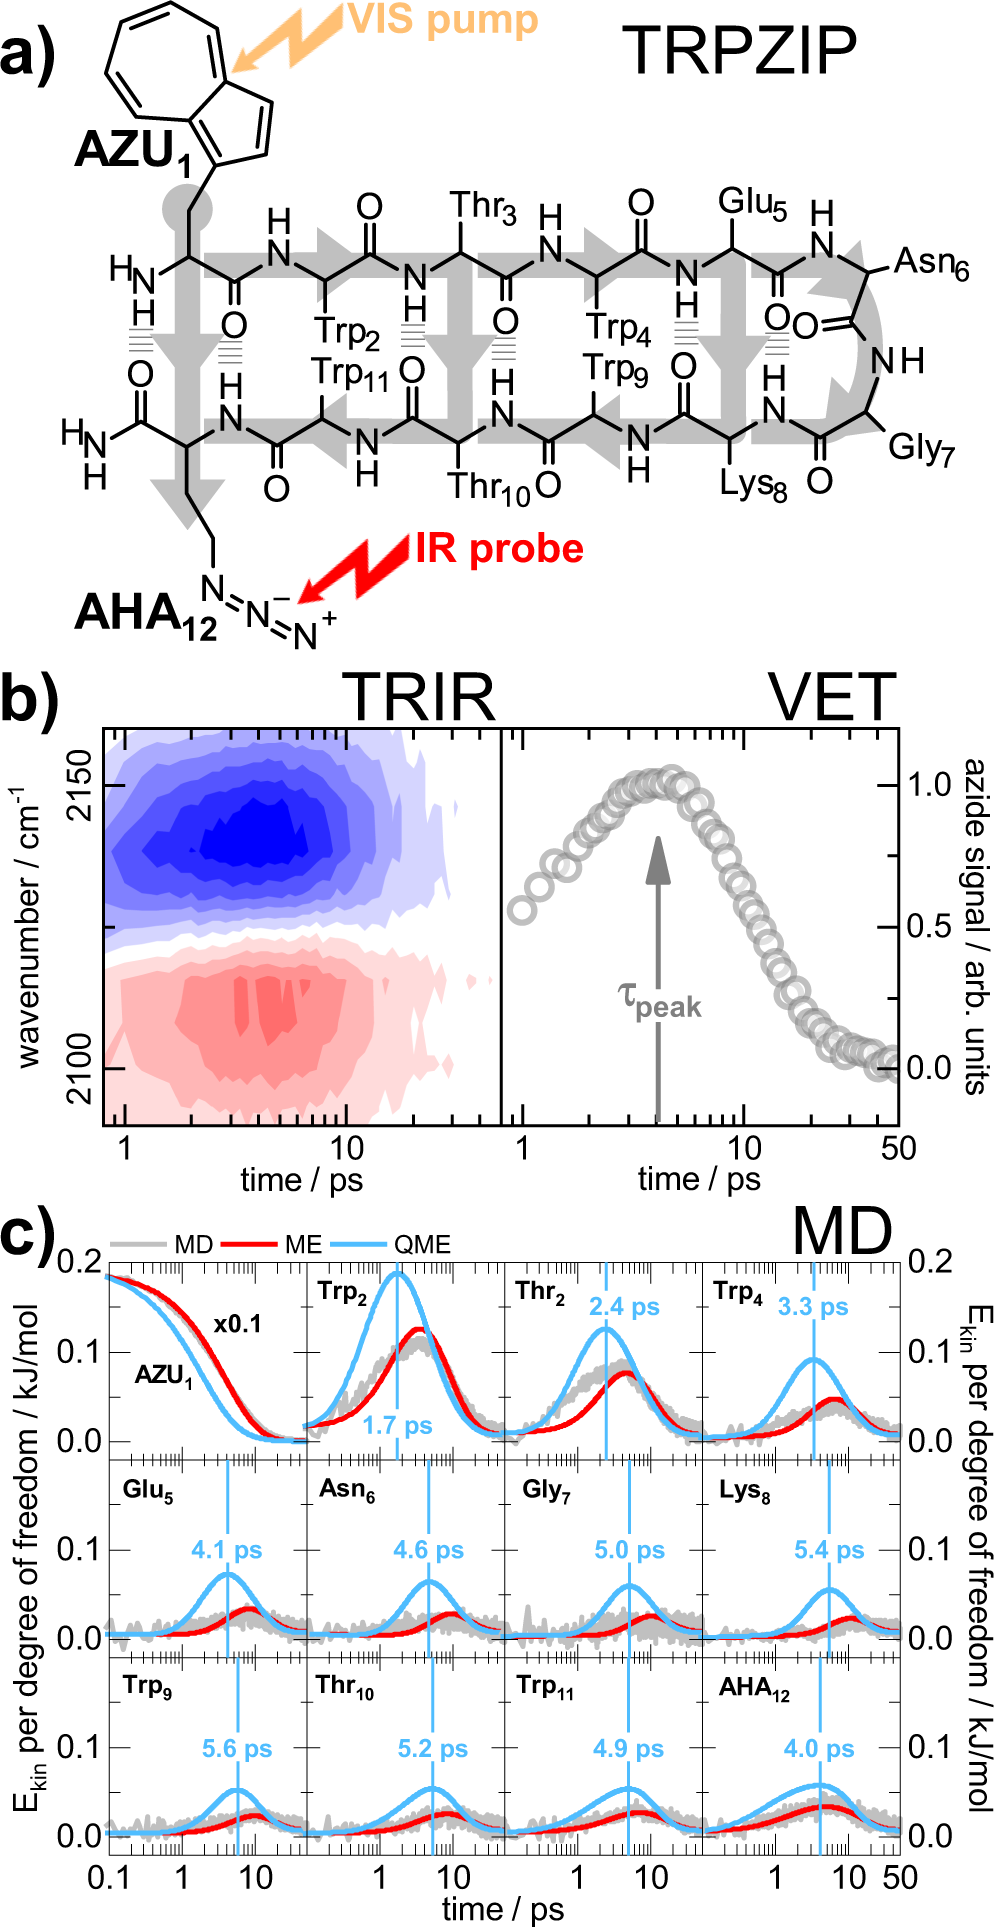 Through bonds or contacts? Mapping protein vibrational energy transfer  using non-canonical amino acids | Nature Communications